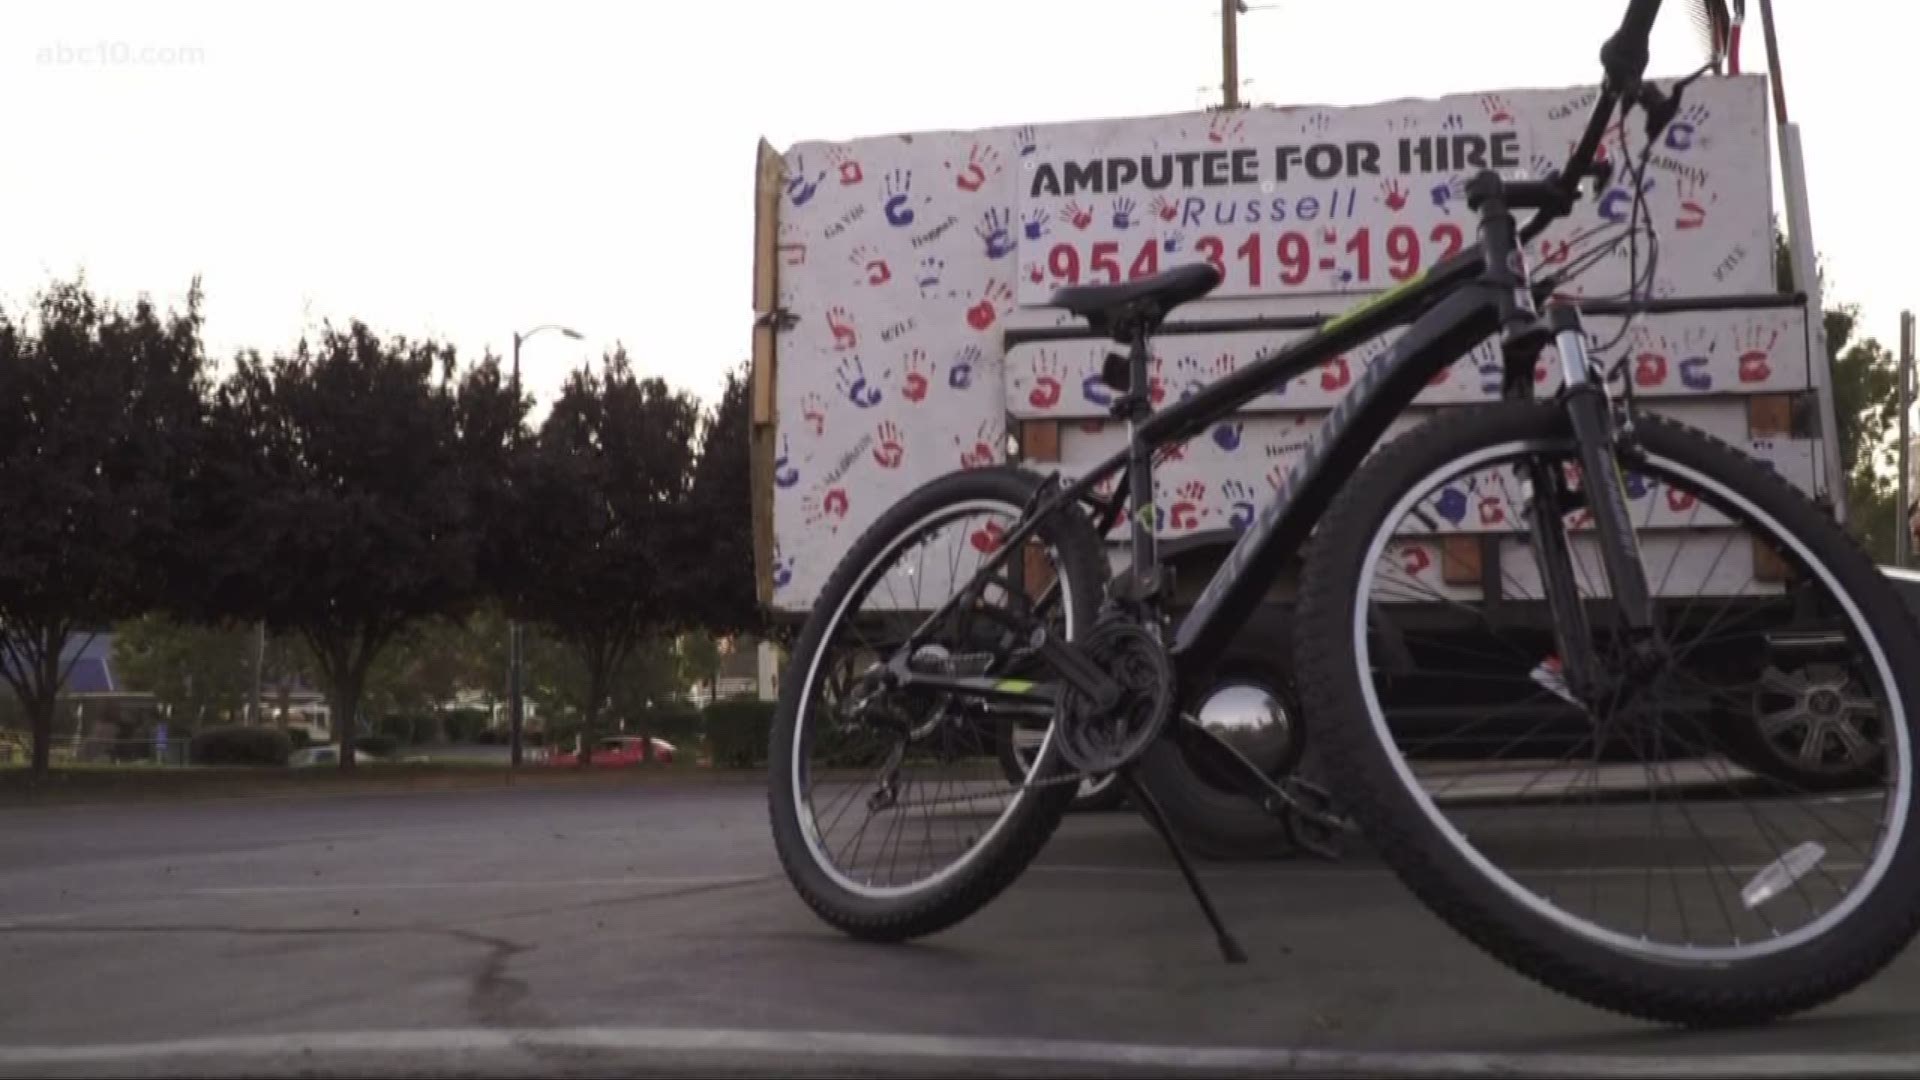 "I don't know why, but I'm gonna get this guy a bike." When a Good Samaritan in Citrus Heights learned that another man, and total stranger, had his bike stolen, he felt compelled to act.